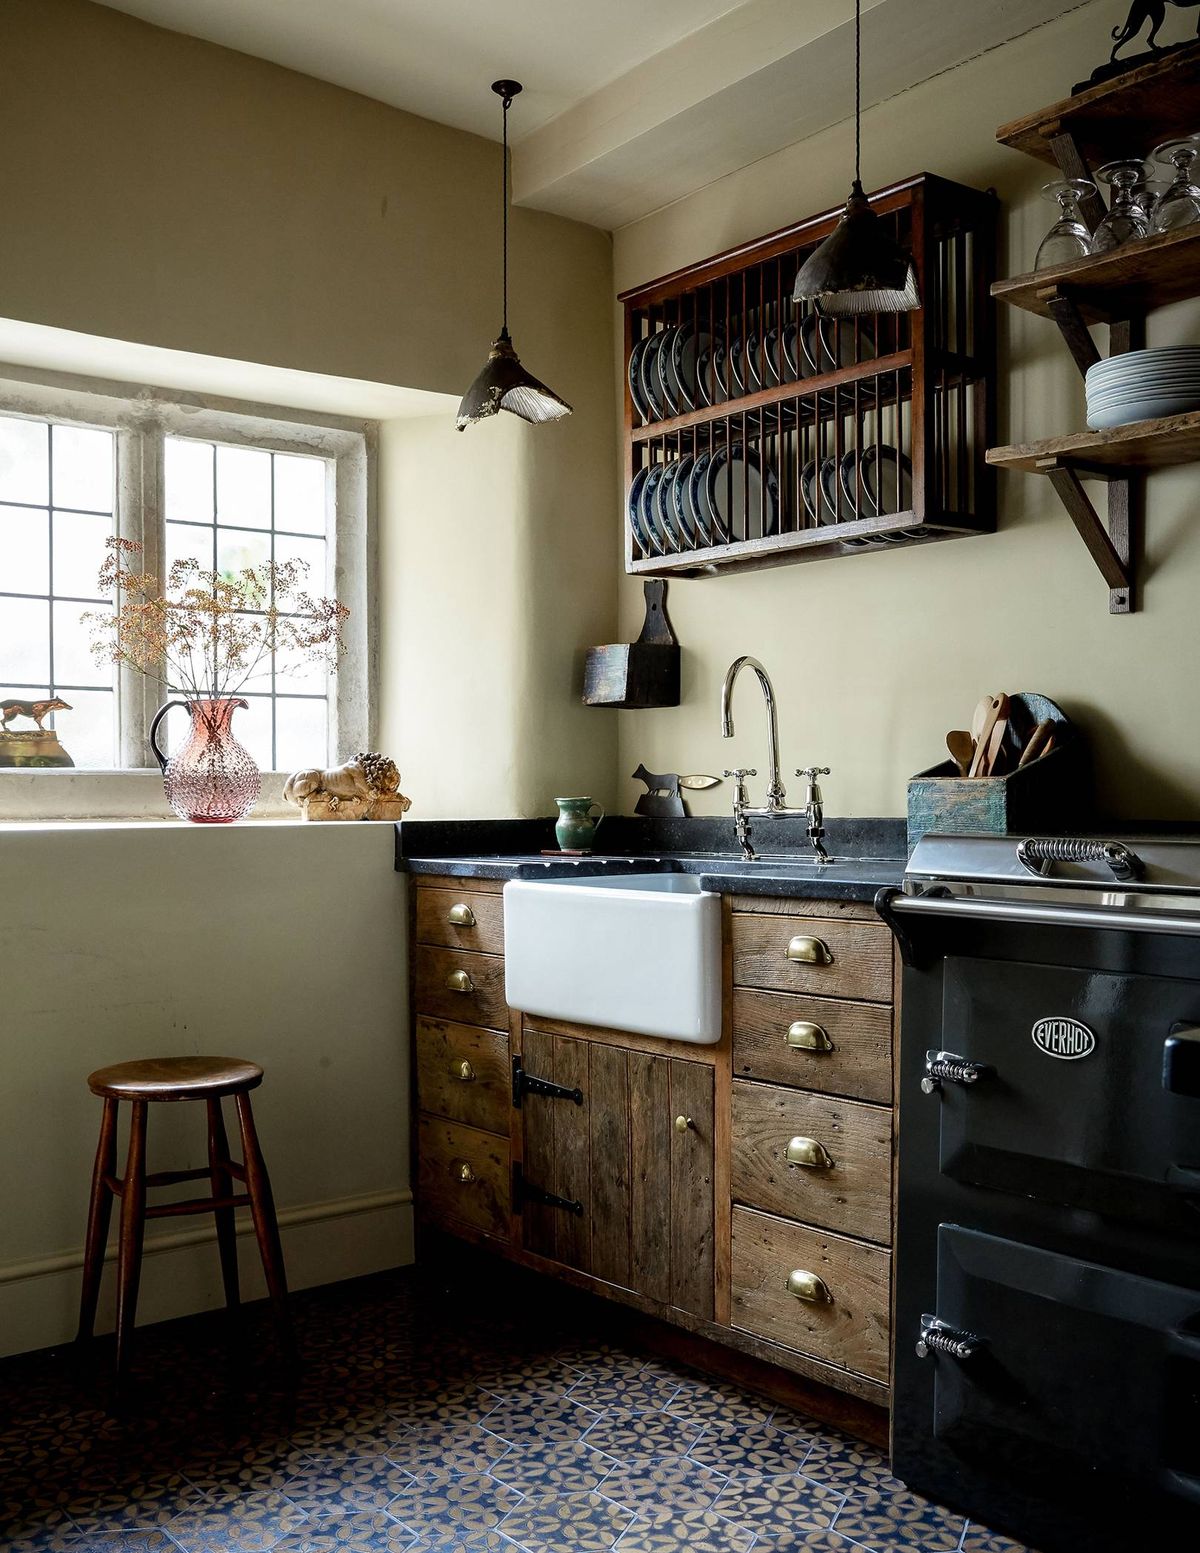 Apron Front Sink in English Country Kitchen via Robin Muir Cotswolds kitchen